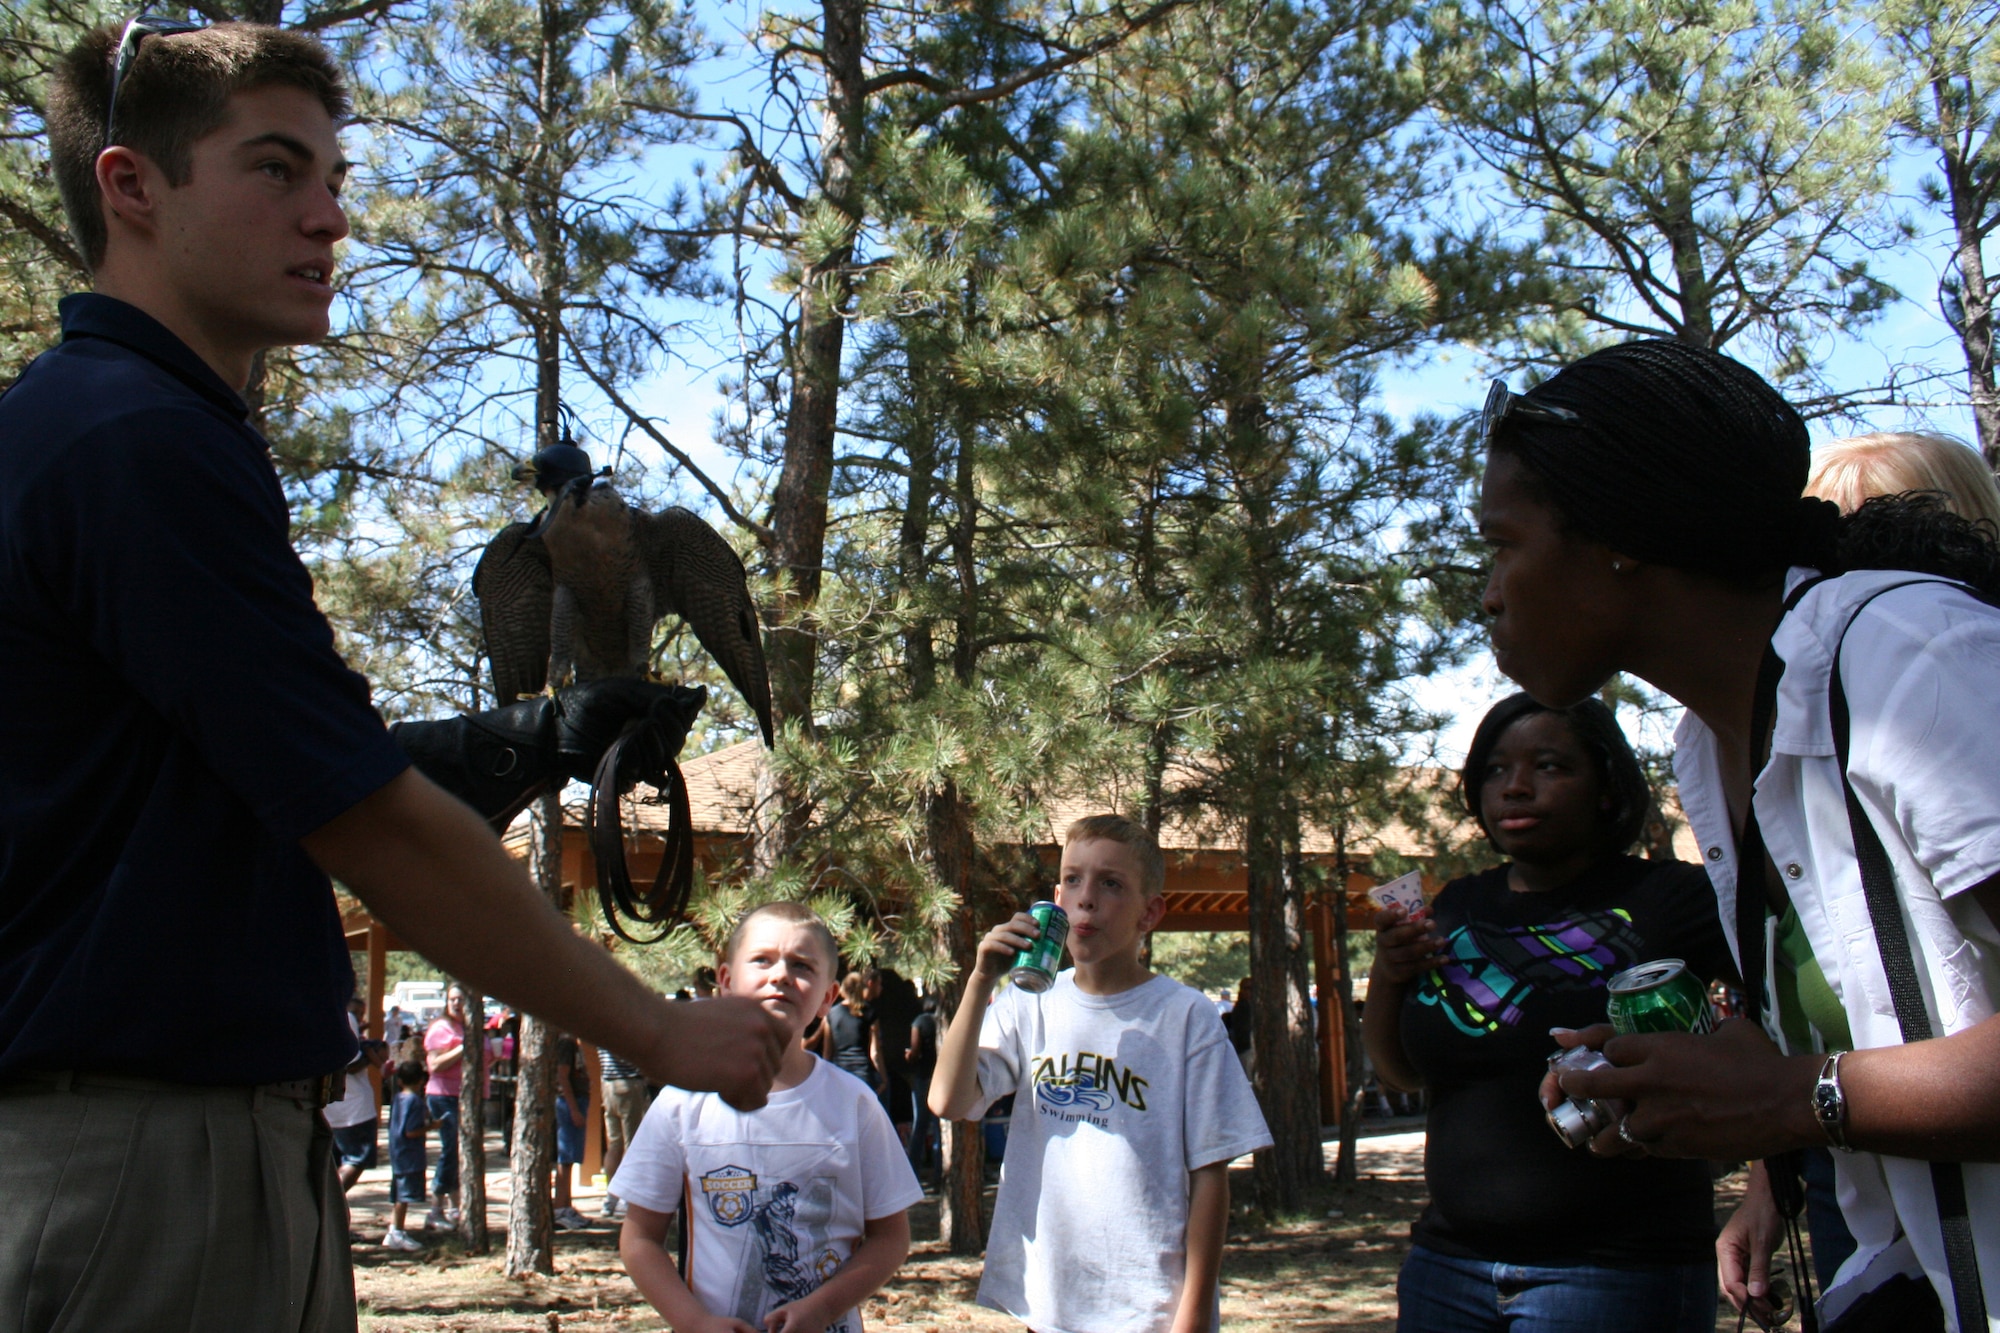 Cameron, an Air Force Academy falconer, holds one of the birds of prey and talks to 310th Space Wing family members about the falconer program, Sept. 12 at the 310SW?s southern units family day picnic. Various organizations from the U.S. Air Force Academy and the 310SW contributed to the success of this year?s picnic. (U.S. Air Force Photo/ Staff Sgt. Desiree Economides)